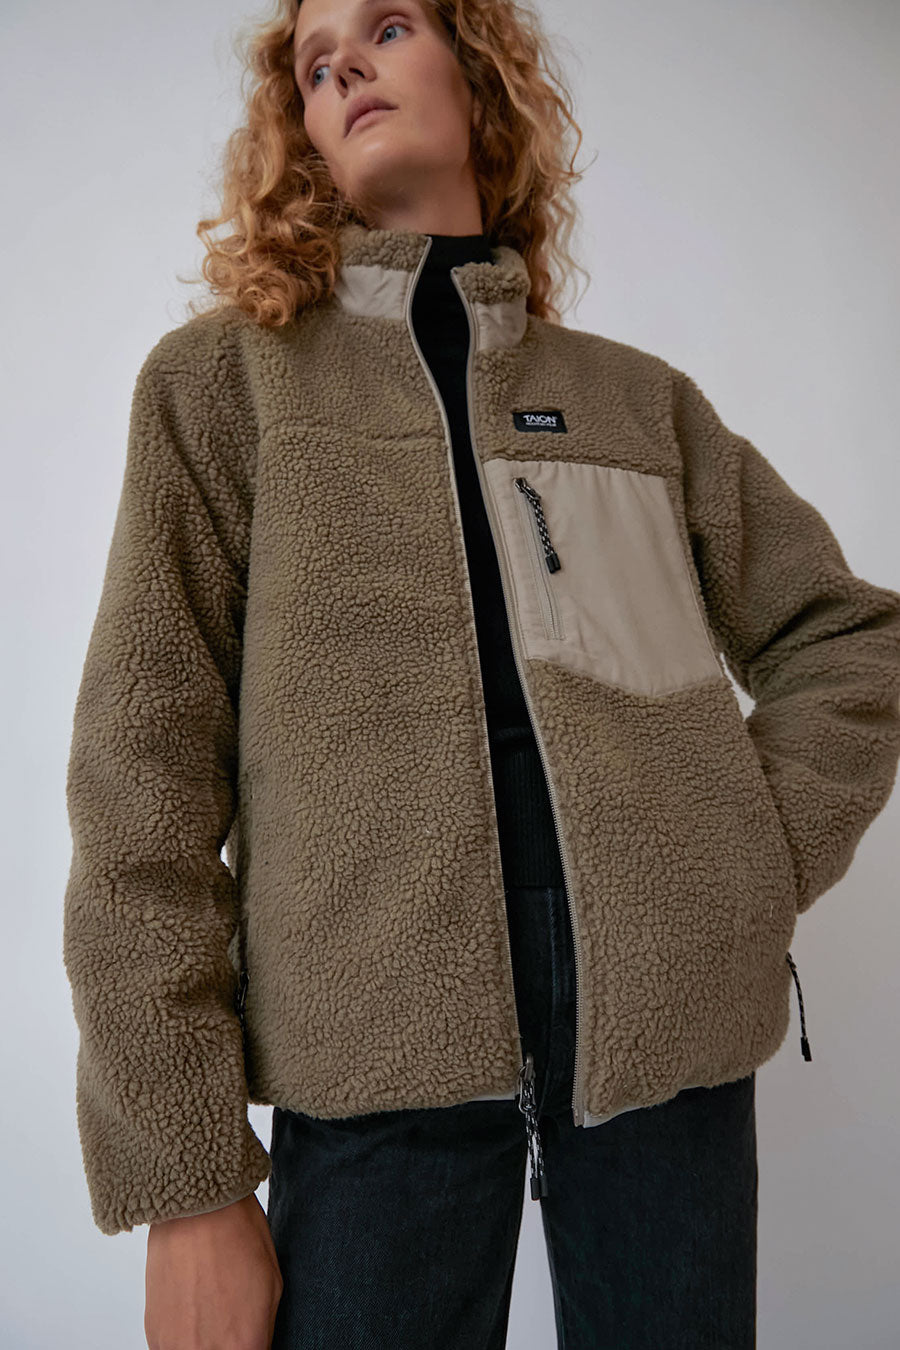 TAION Down x BOA Reversible Jacket in Light Grey with Beige Fleece